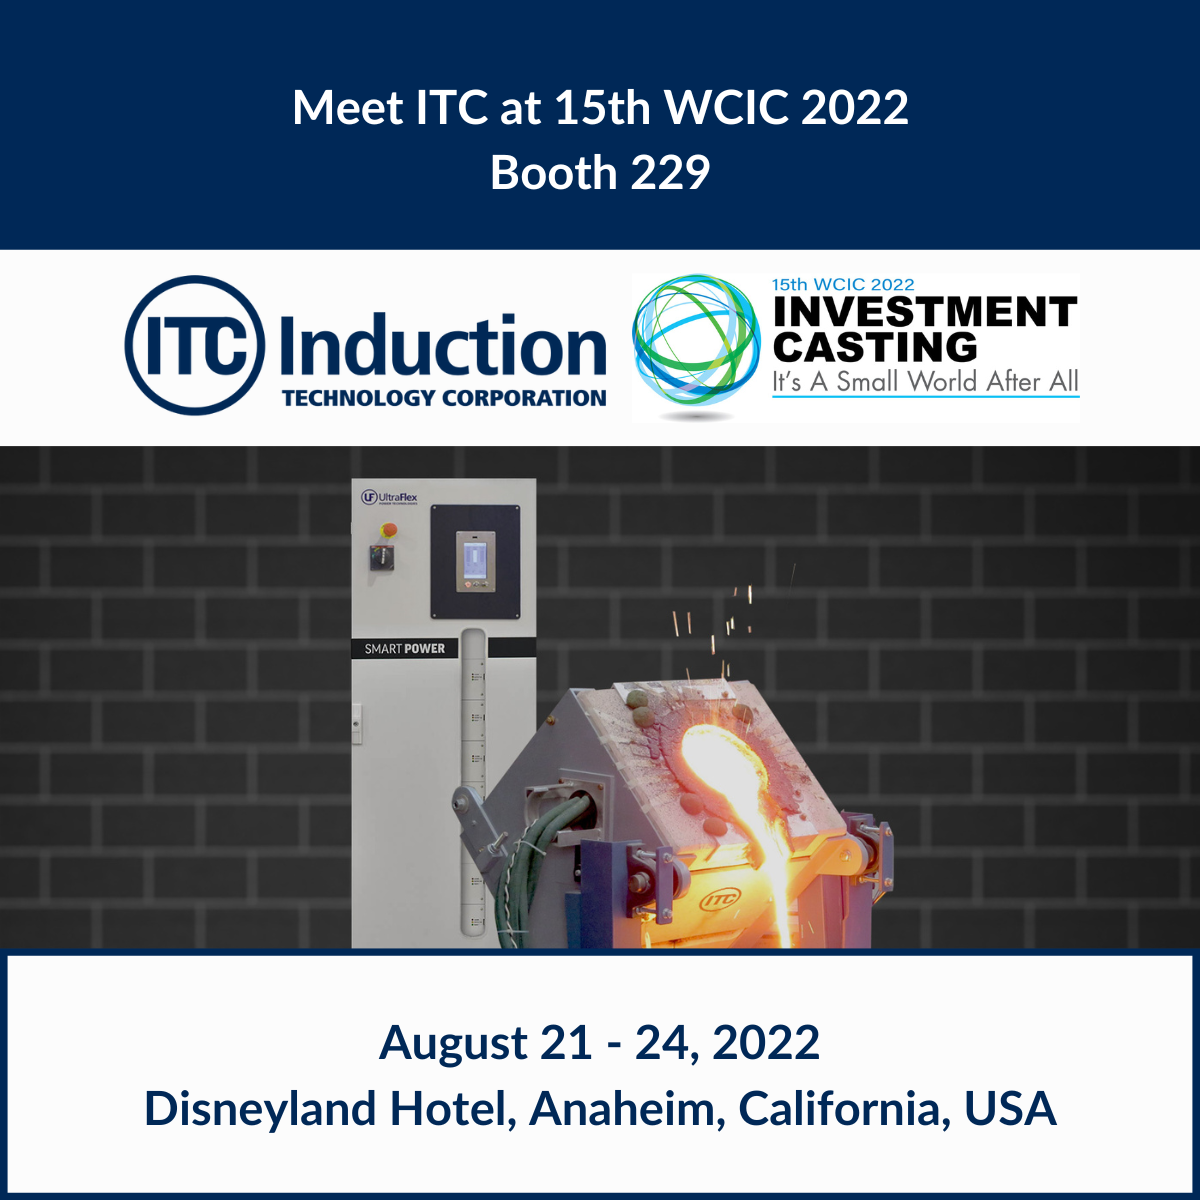 ITC at WCIC 2022